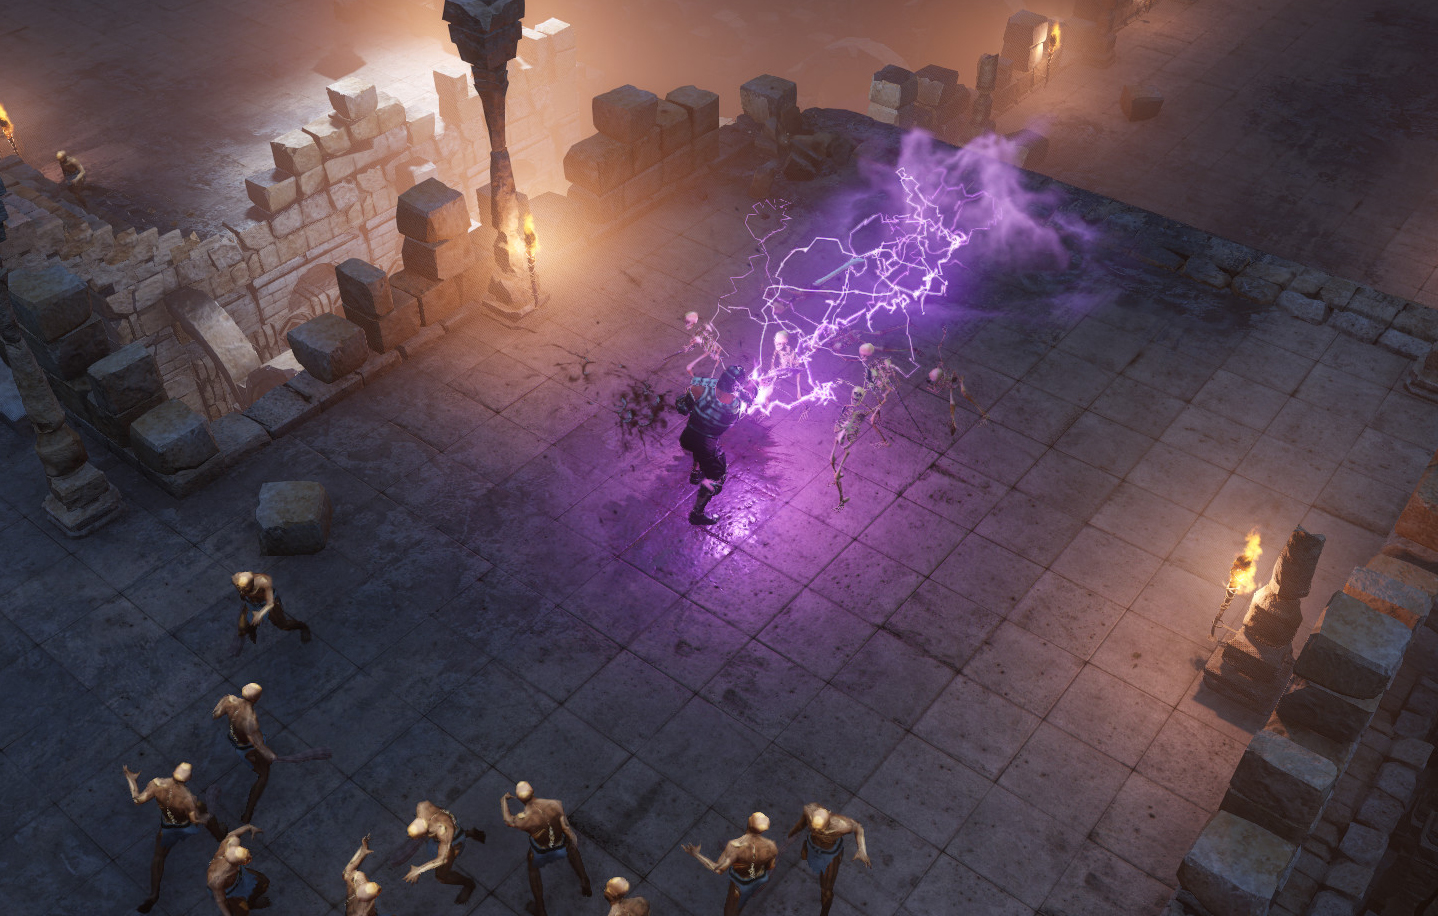 instal the new version for windows Wolcen: Lords of Mayhem